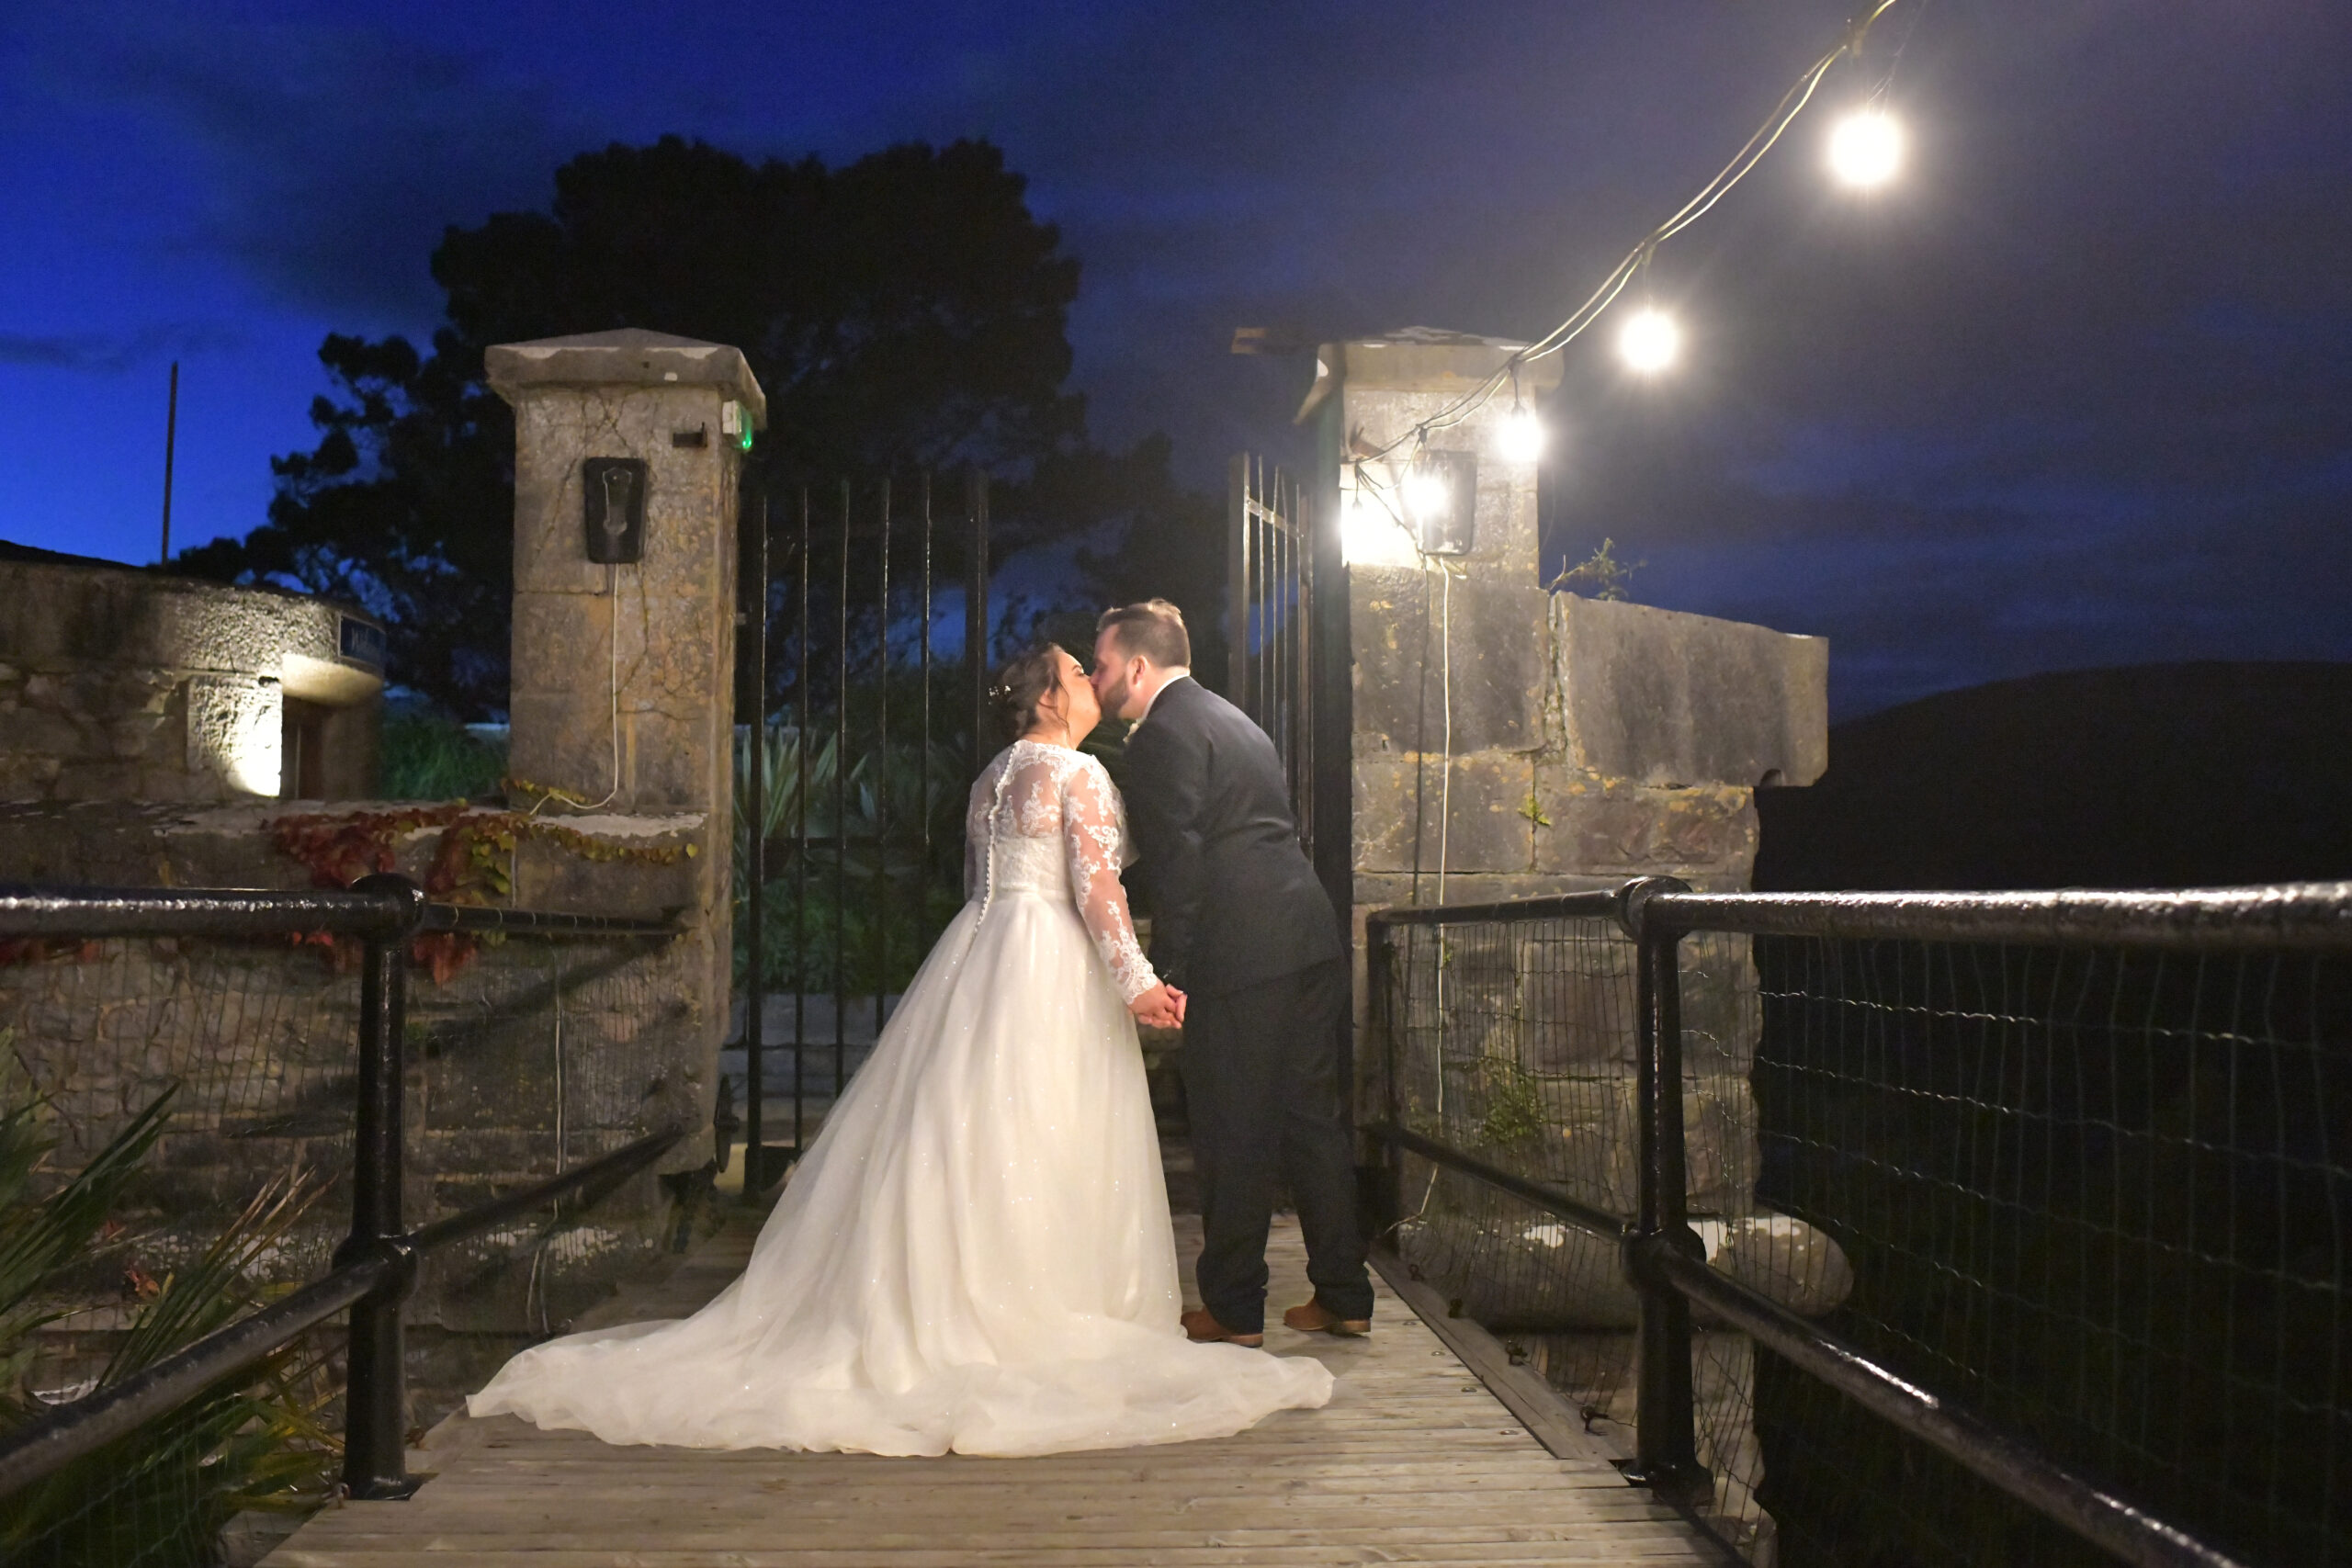 Wedding Photography at night on the bridge at Polhawn Fort